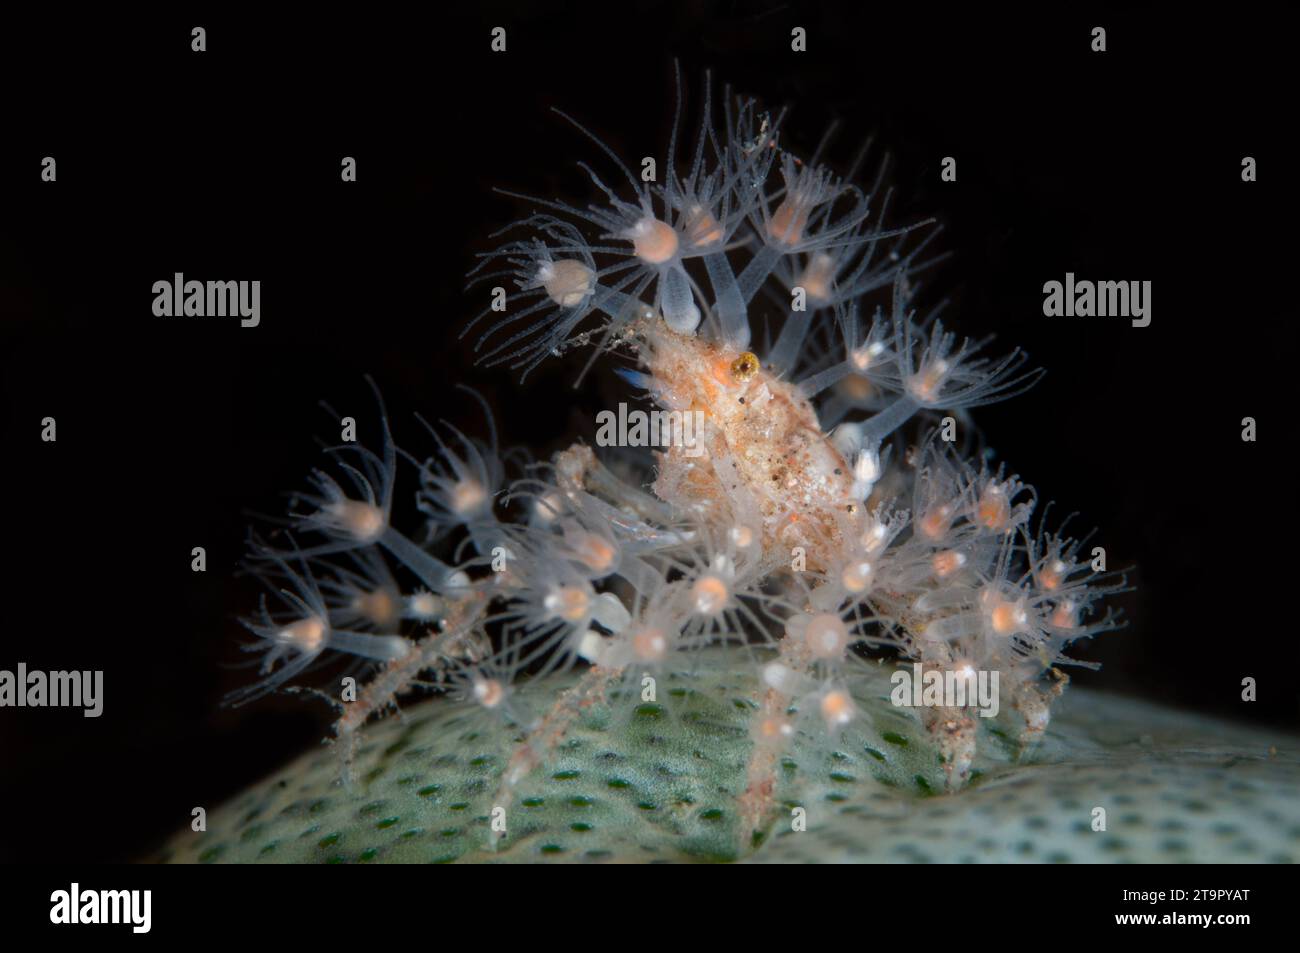 Spider Crab, Achaeus spinosus, carrying small Anemones for protection and camouflage on on Green Barrel Sea Squirt, Didemnum molle, Seraya House Reef Stock Photo